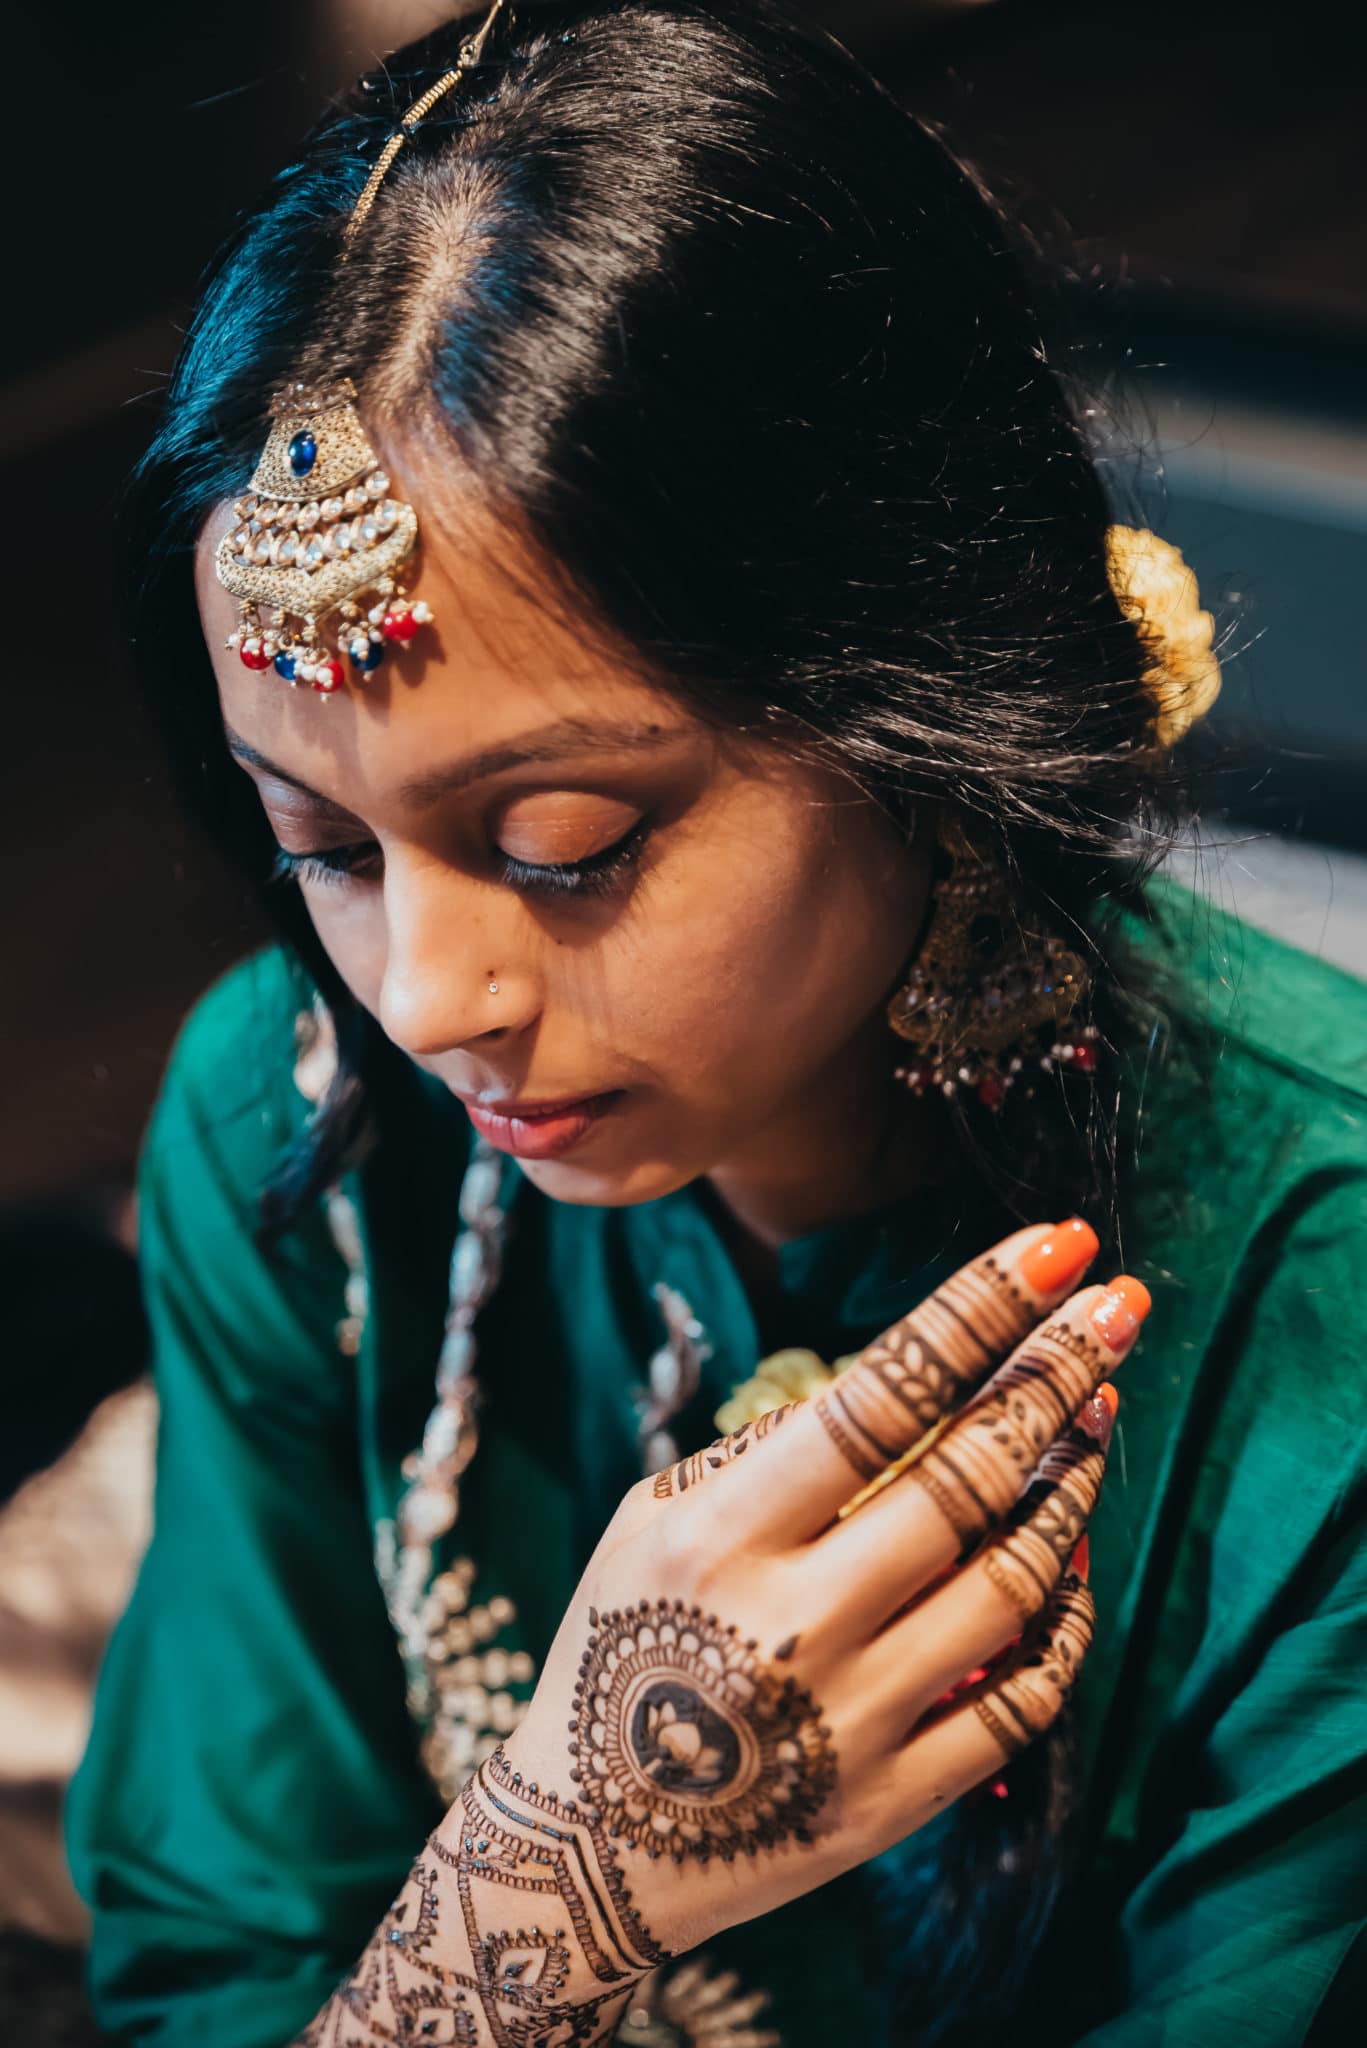 Bookmark These Unique & Best Wedding Mehndi Poses for Brides for Your  Upcoming Mehndi Photoshoot!